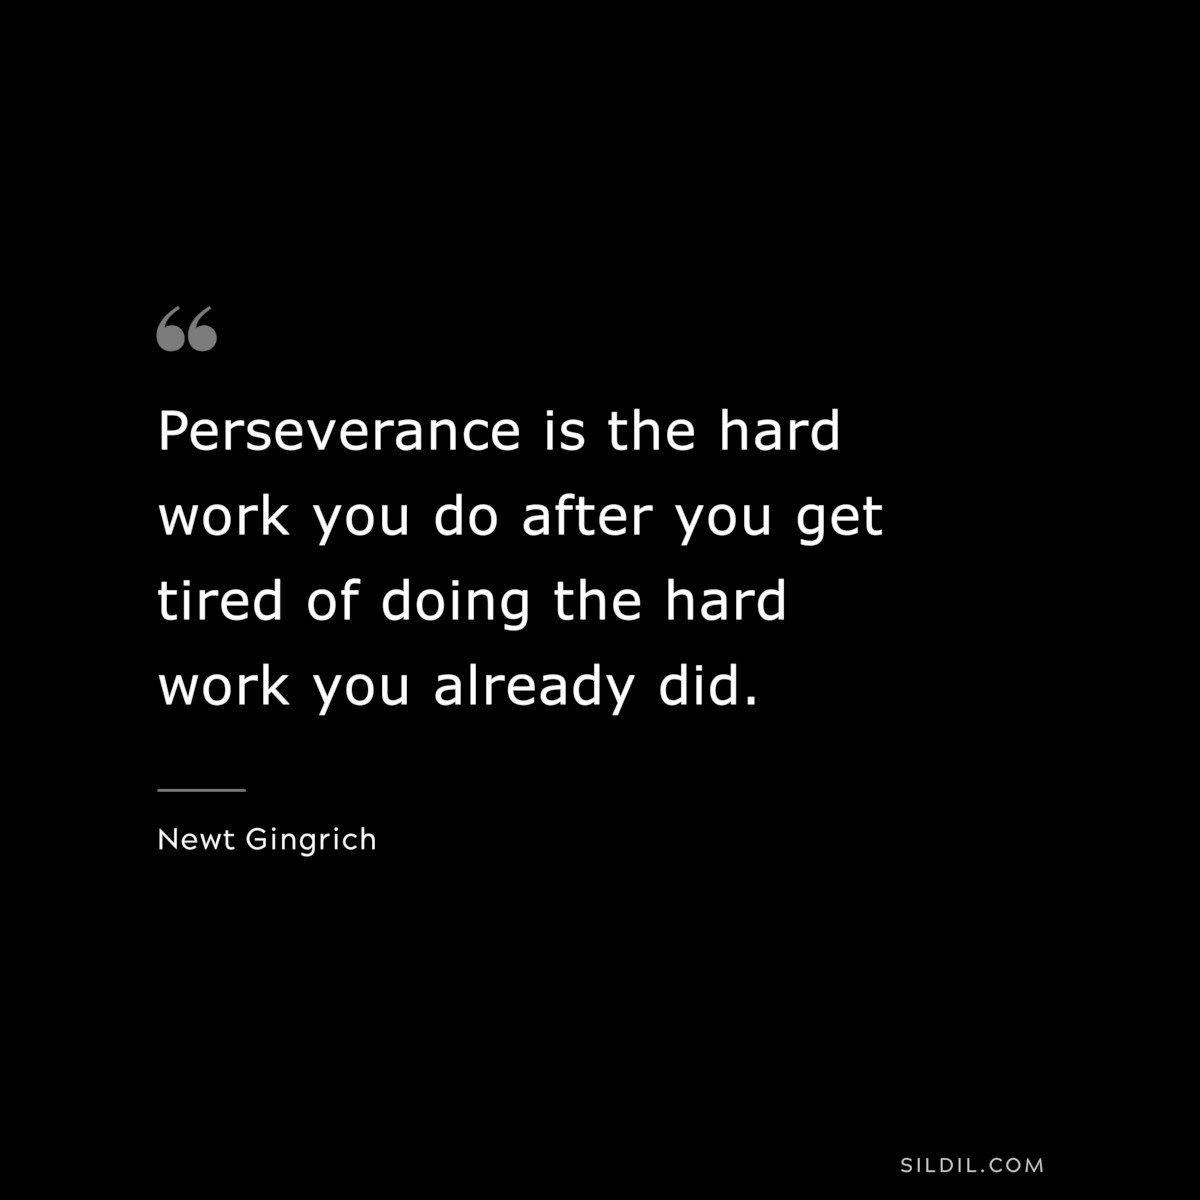 Perseverance is the hard work you do after you get tired of doing the hard work you already did. ― Newt Gingrich